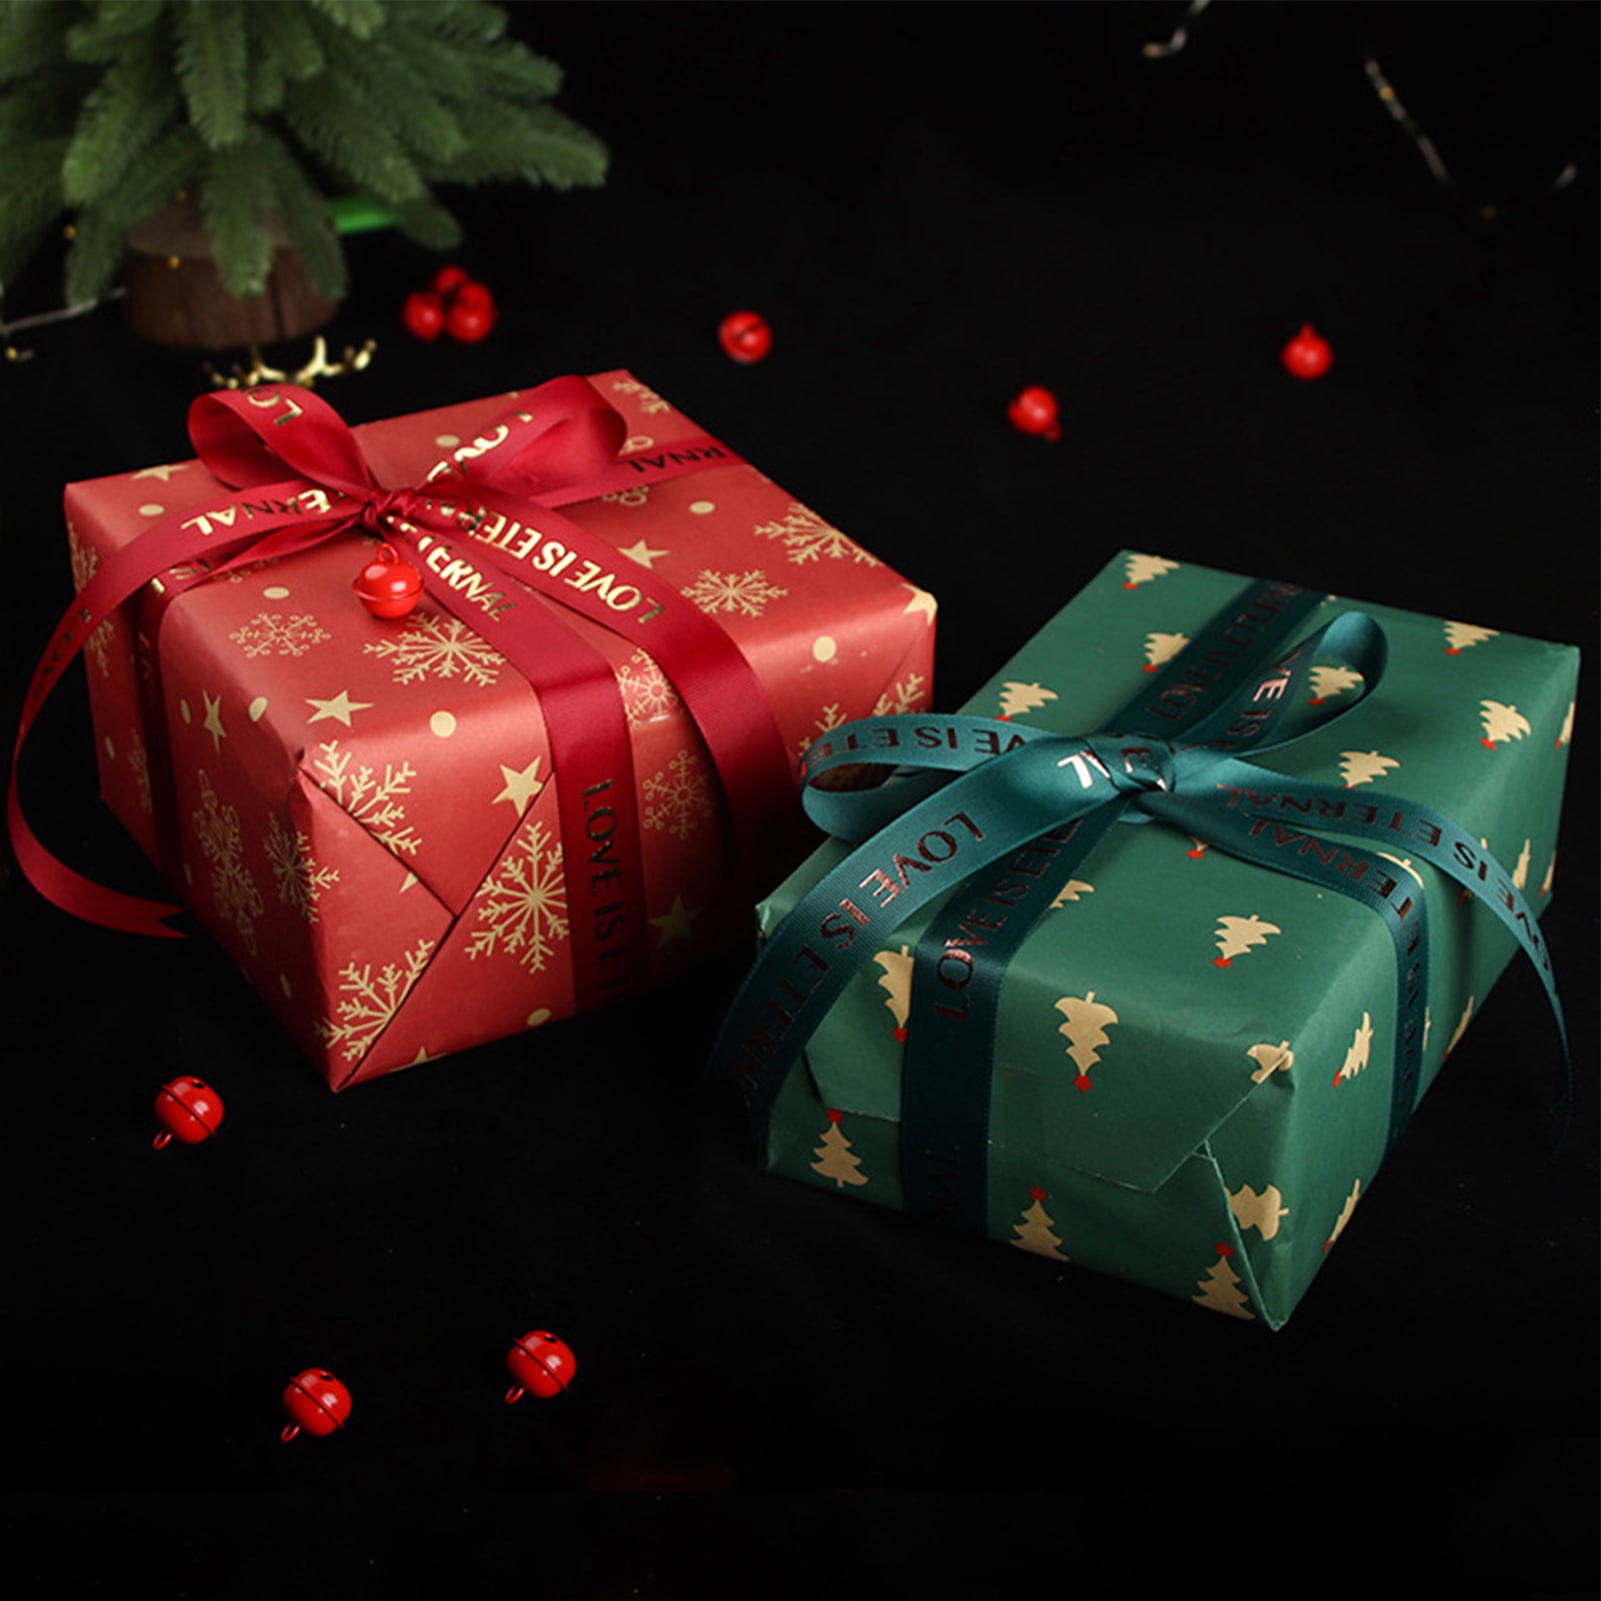 8 Roll Christmas Wrapping paper, Brown Kraft Paper with Red and Green  Pattern Christmas Elements Collection, 20x27 inches Per Roll 